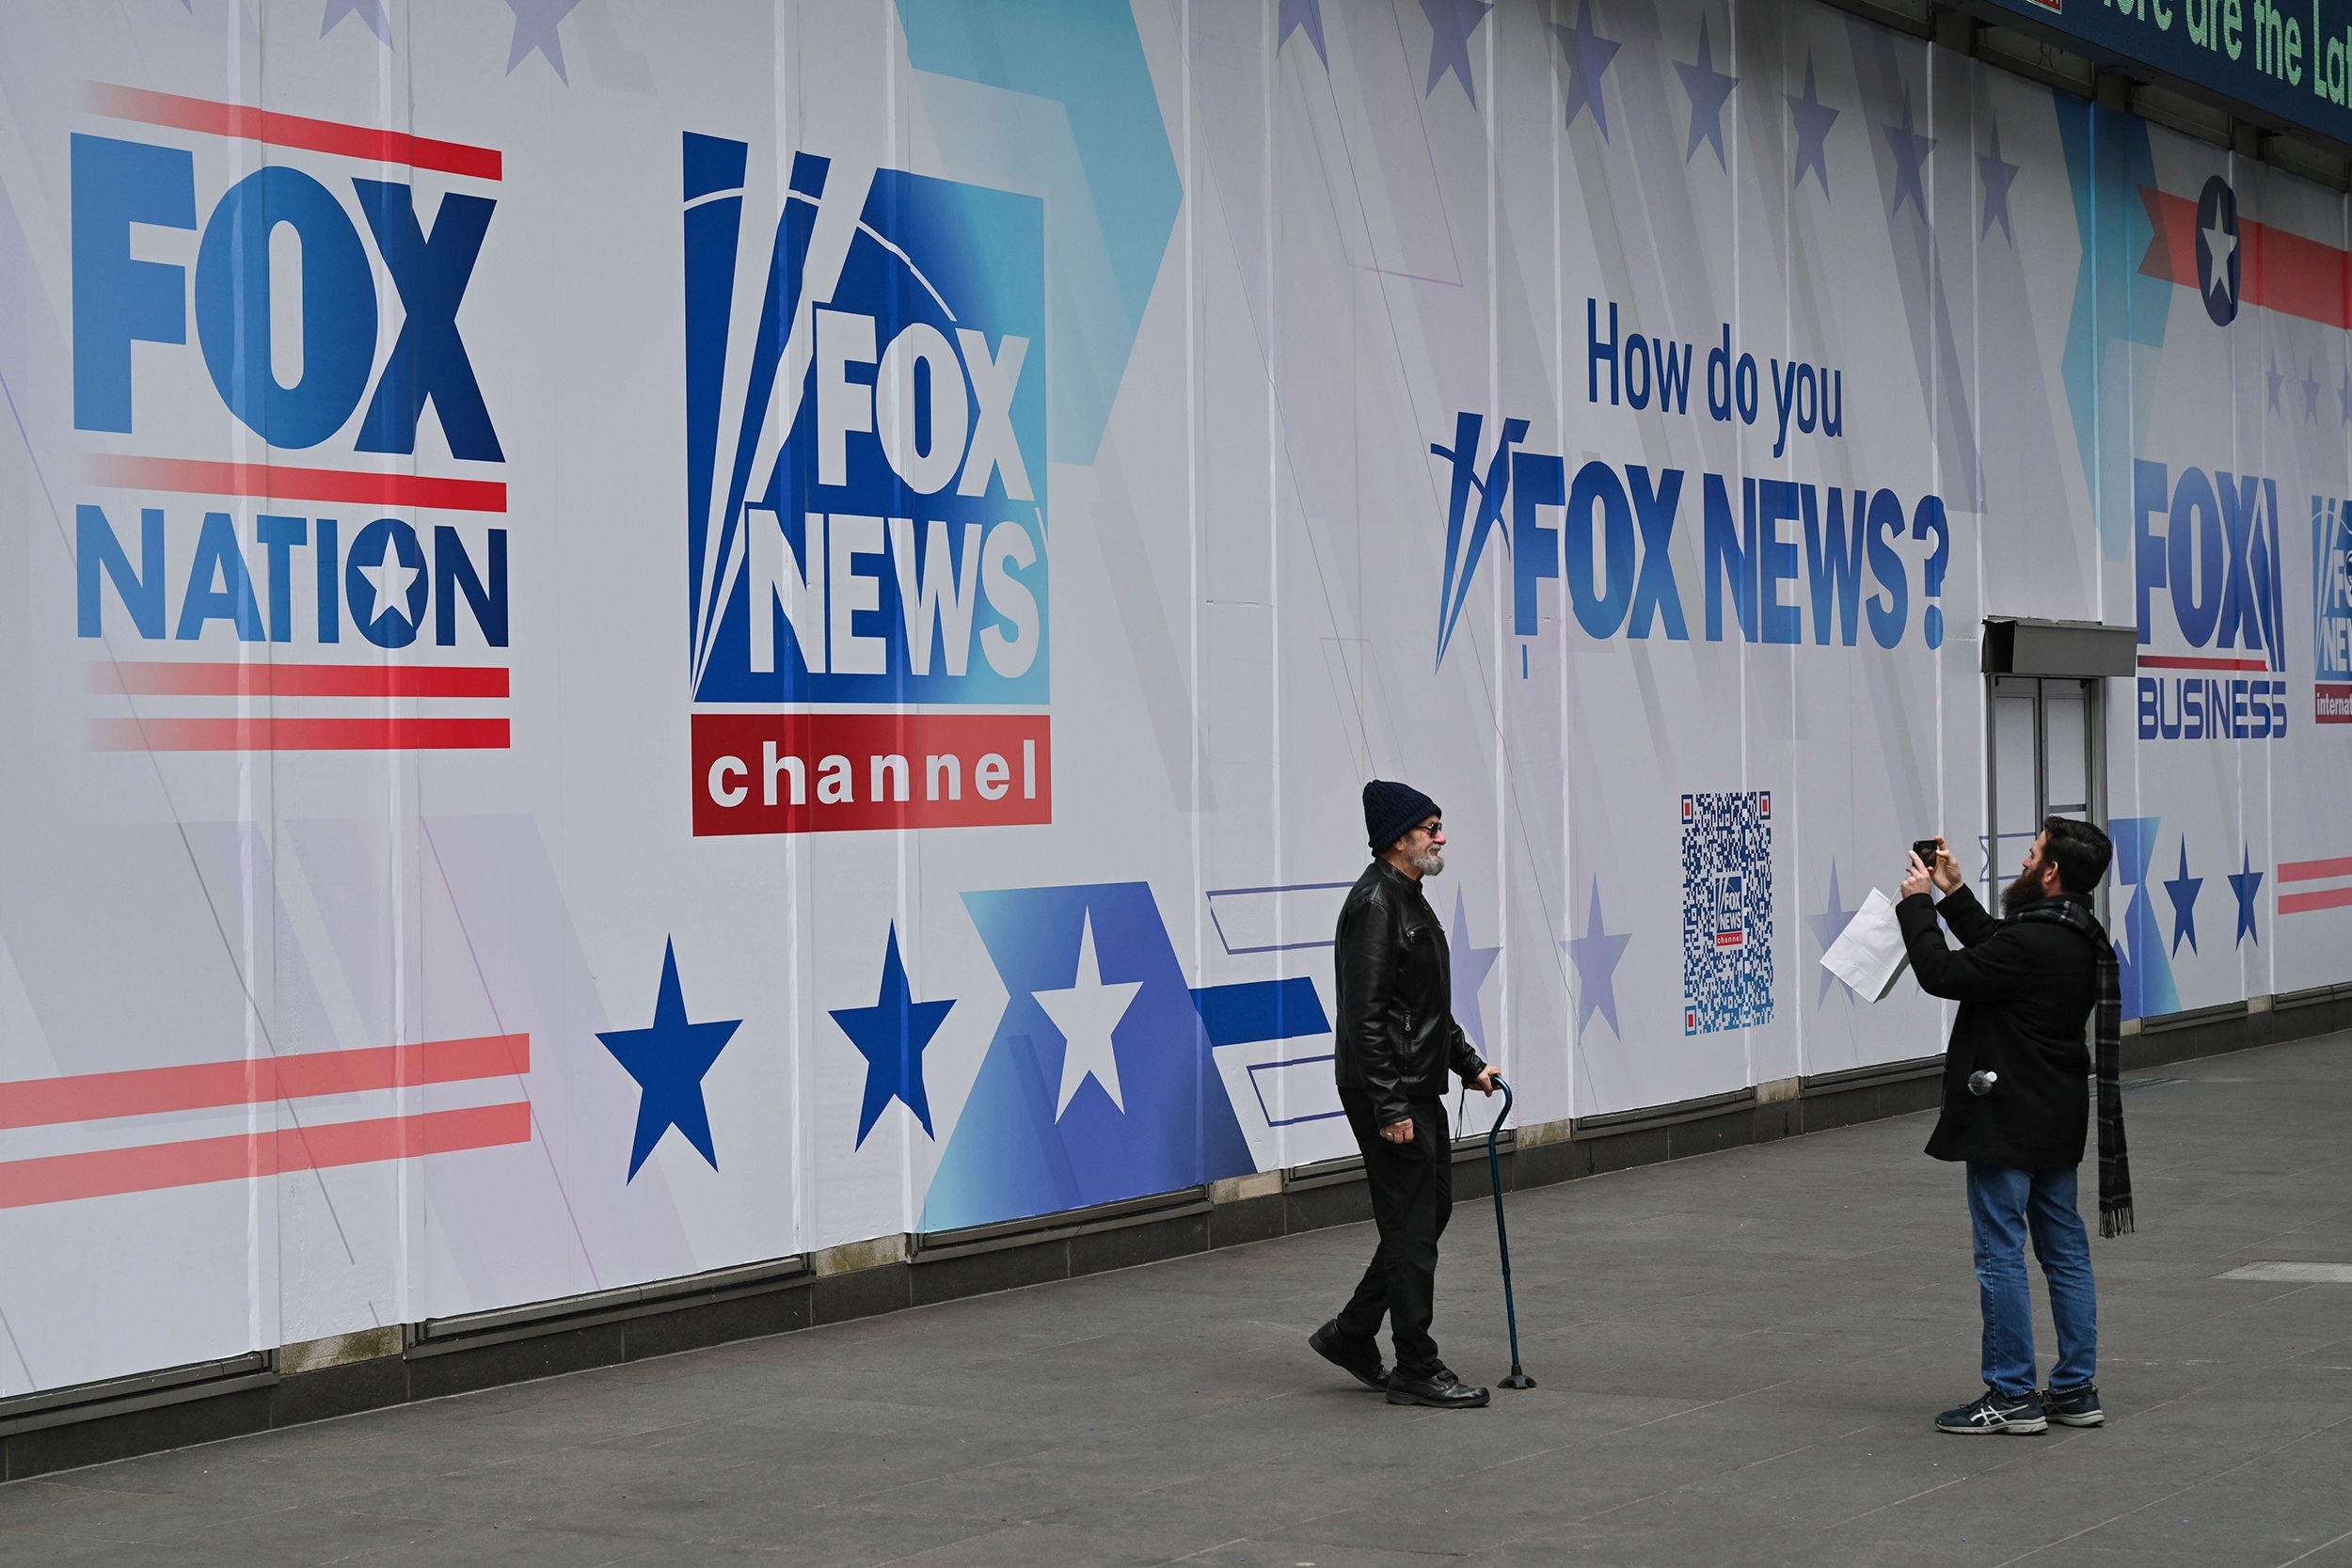 When Fox News viewers flip to CNN, their opinions shift too, study finds